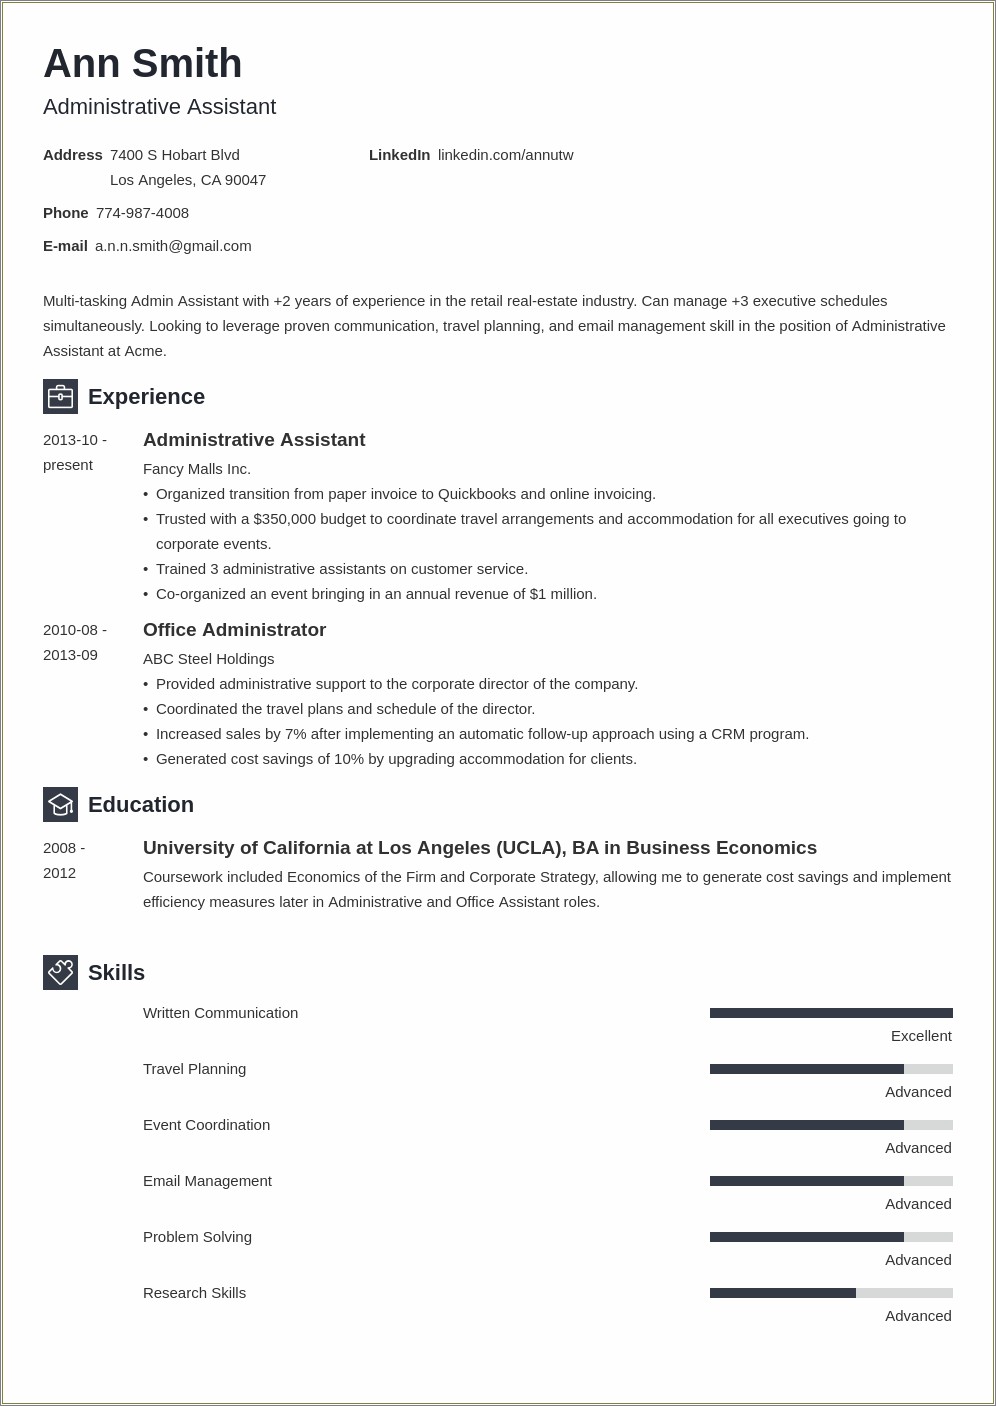 Administrative Assistant Resume Skills And Abilities